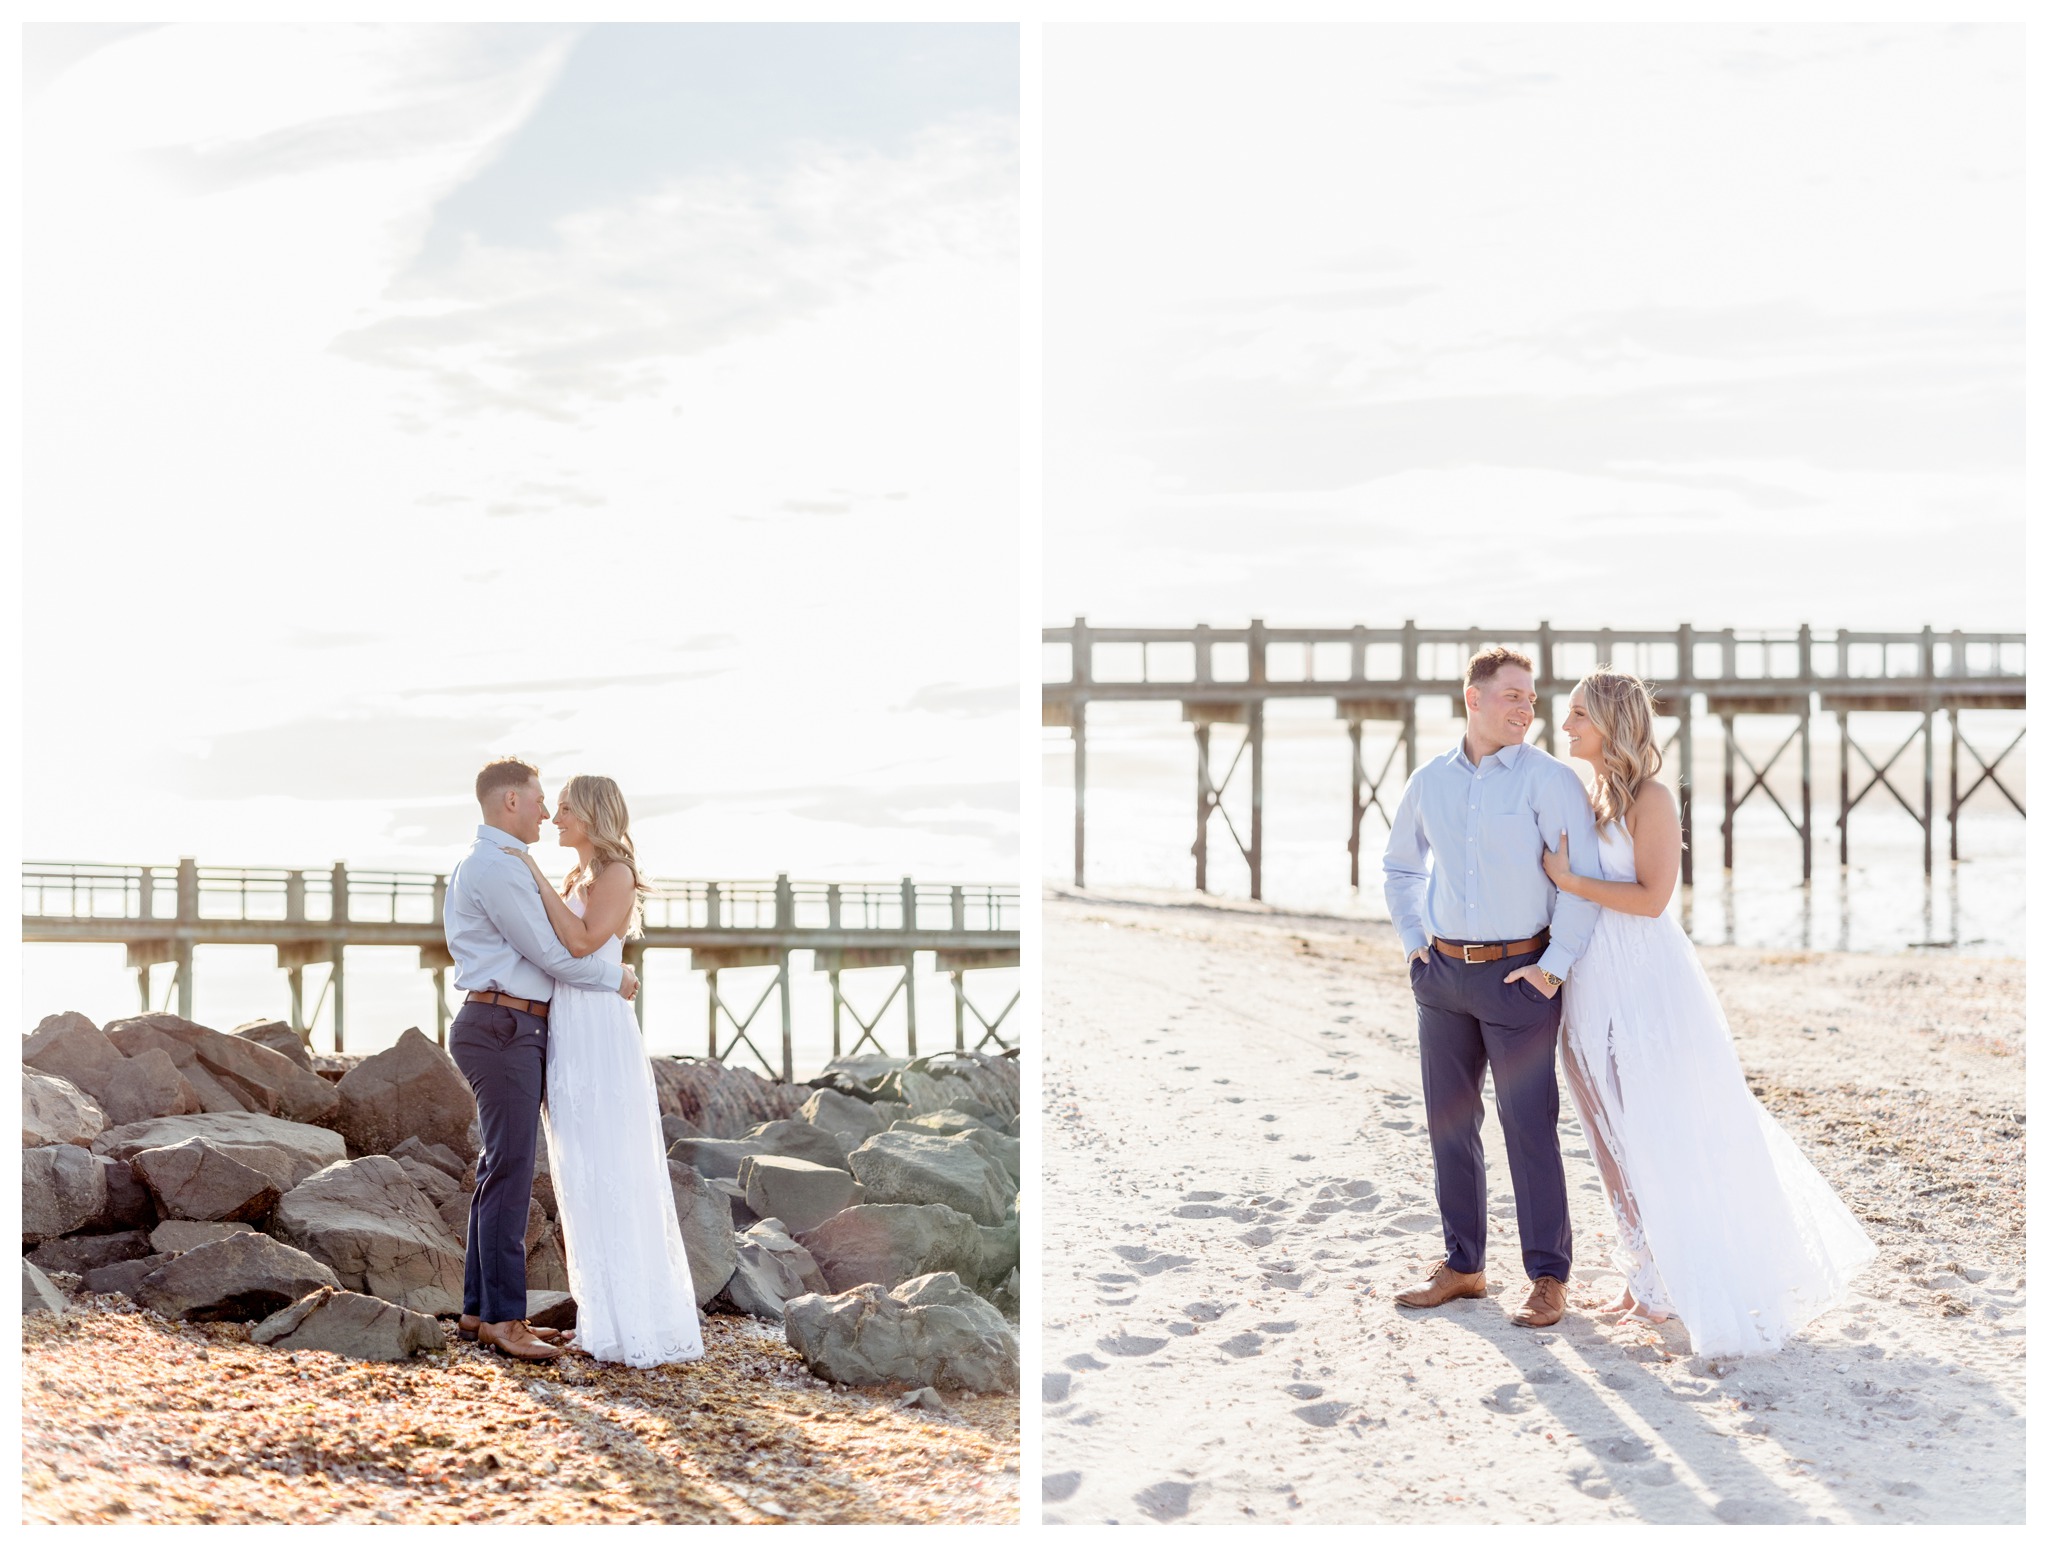 walnut beach engagement session in milford ct at silver sands beach